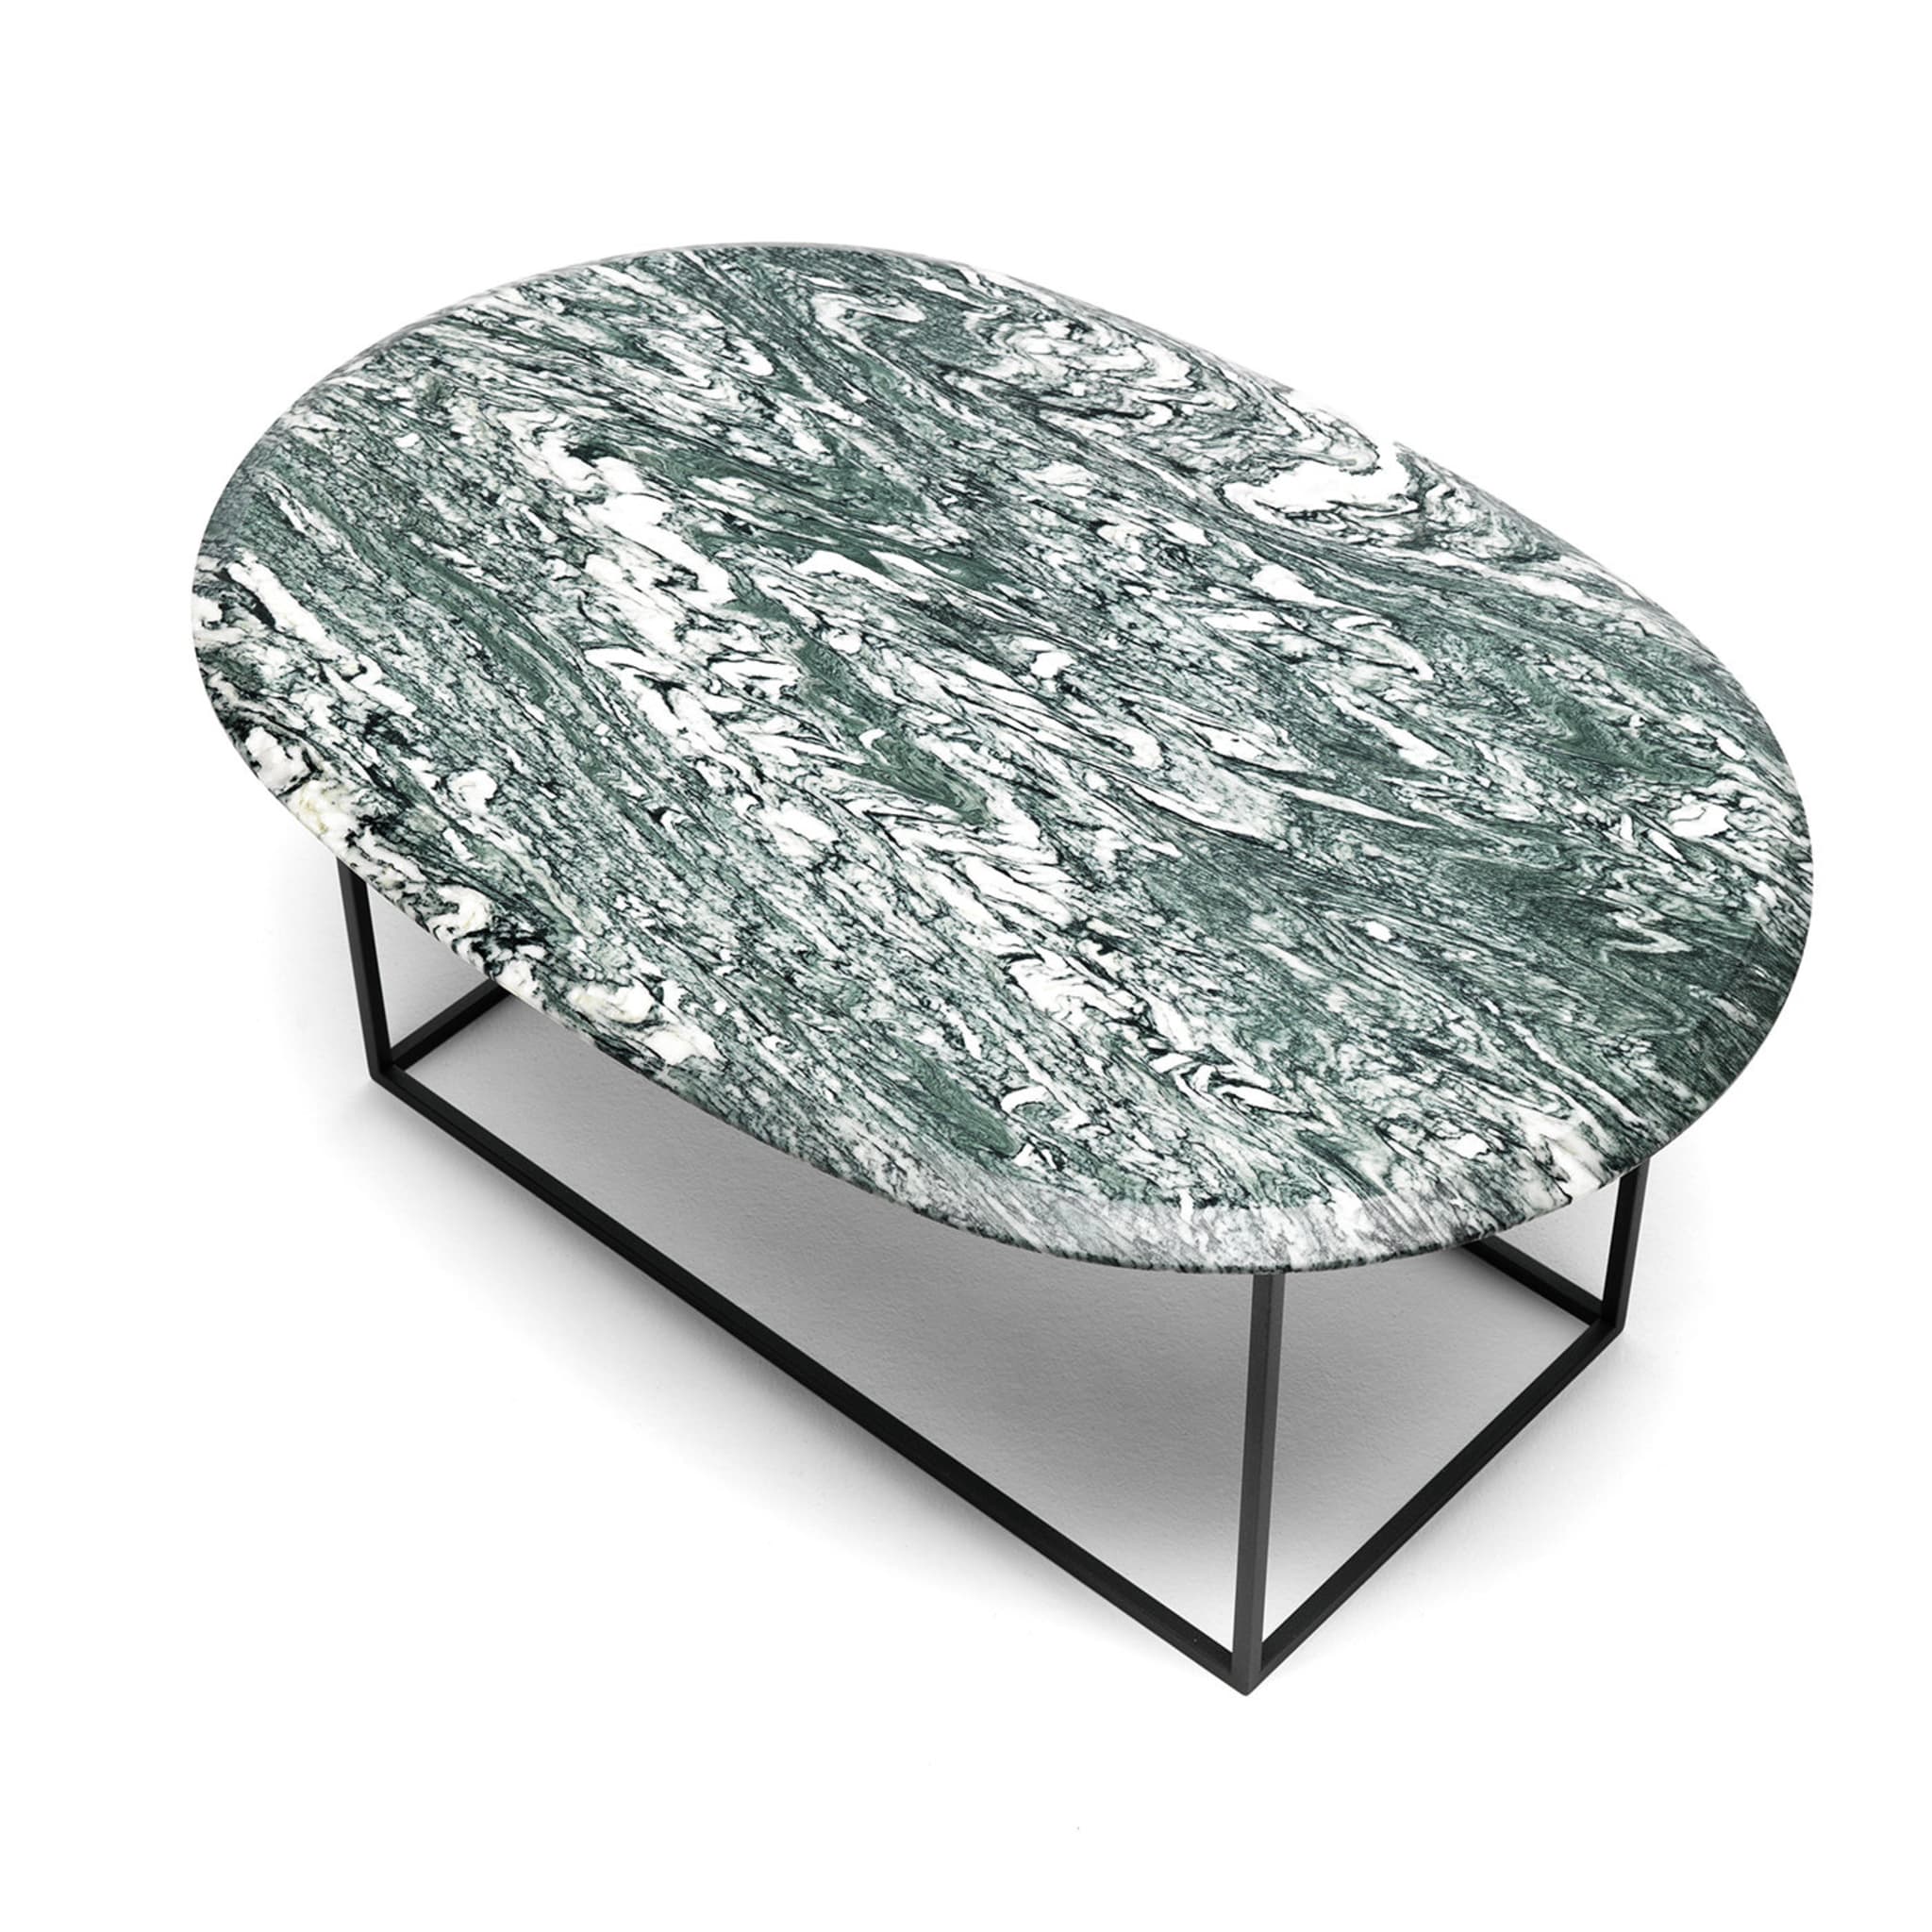 MT Low Coffee Table with Cipollino Marble Top - Alternative view 2